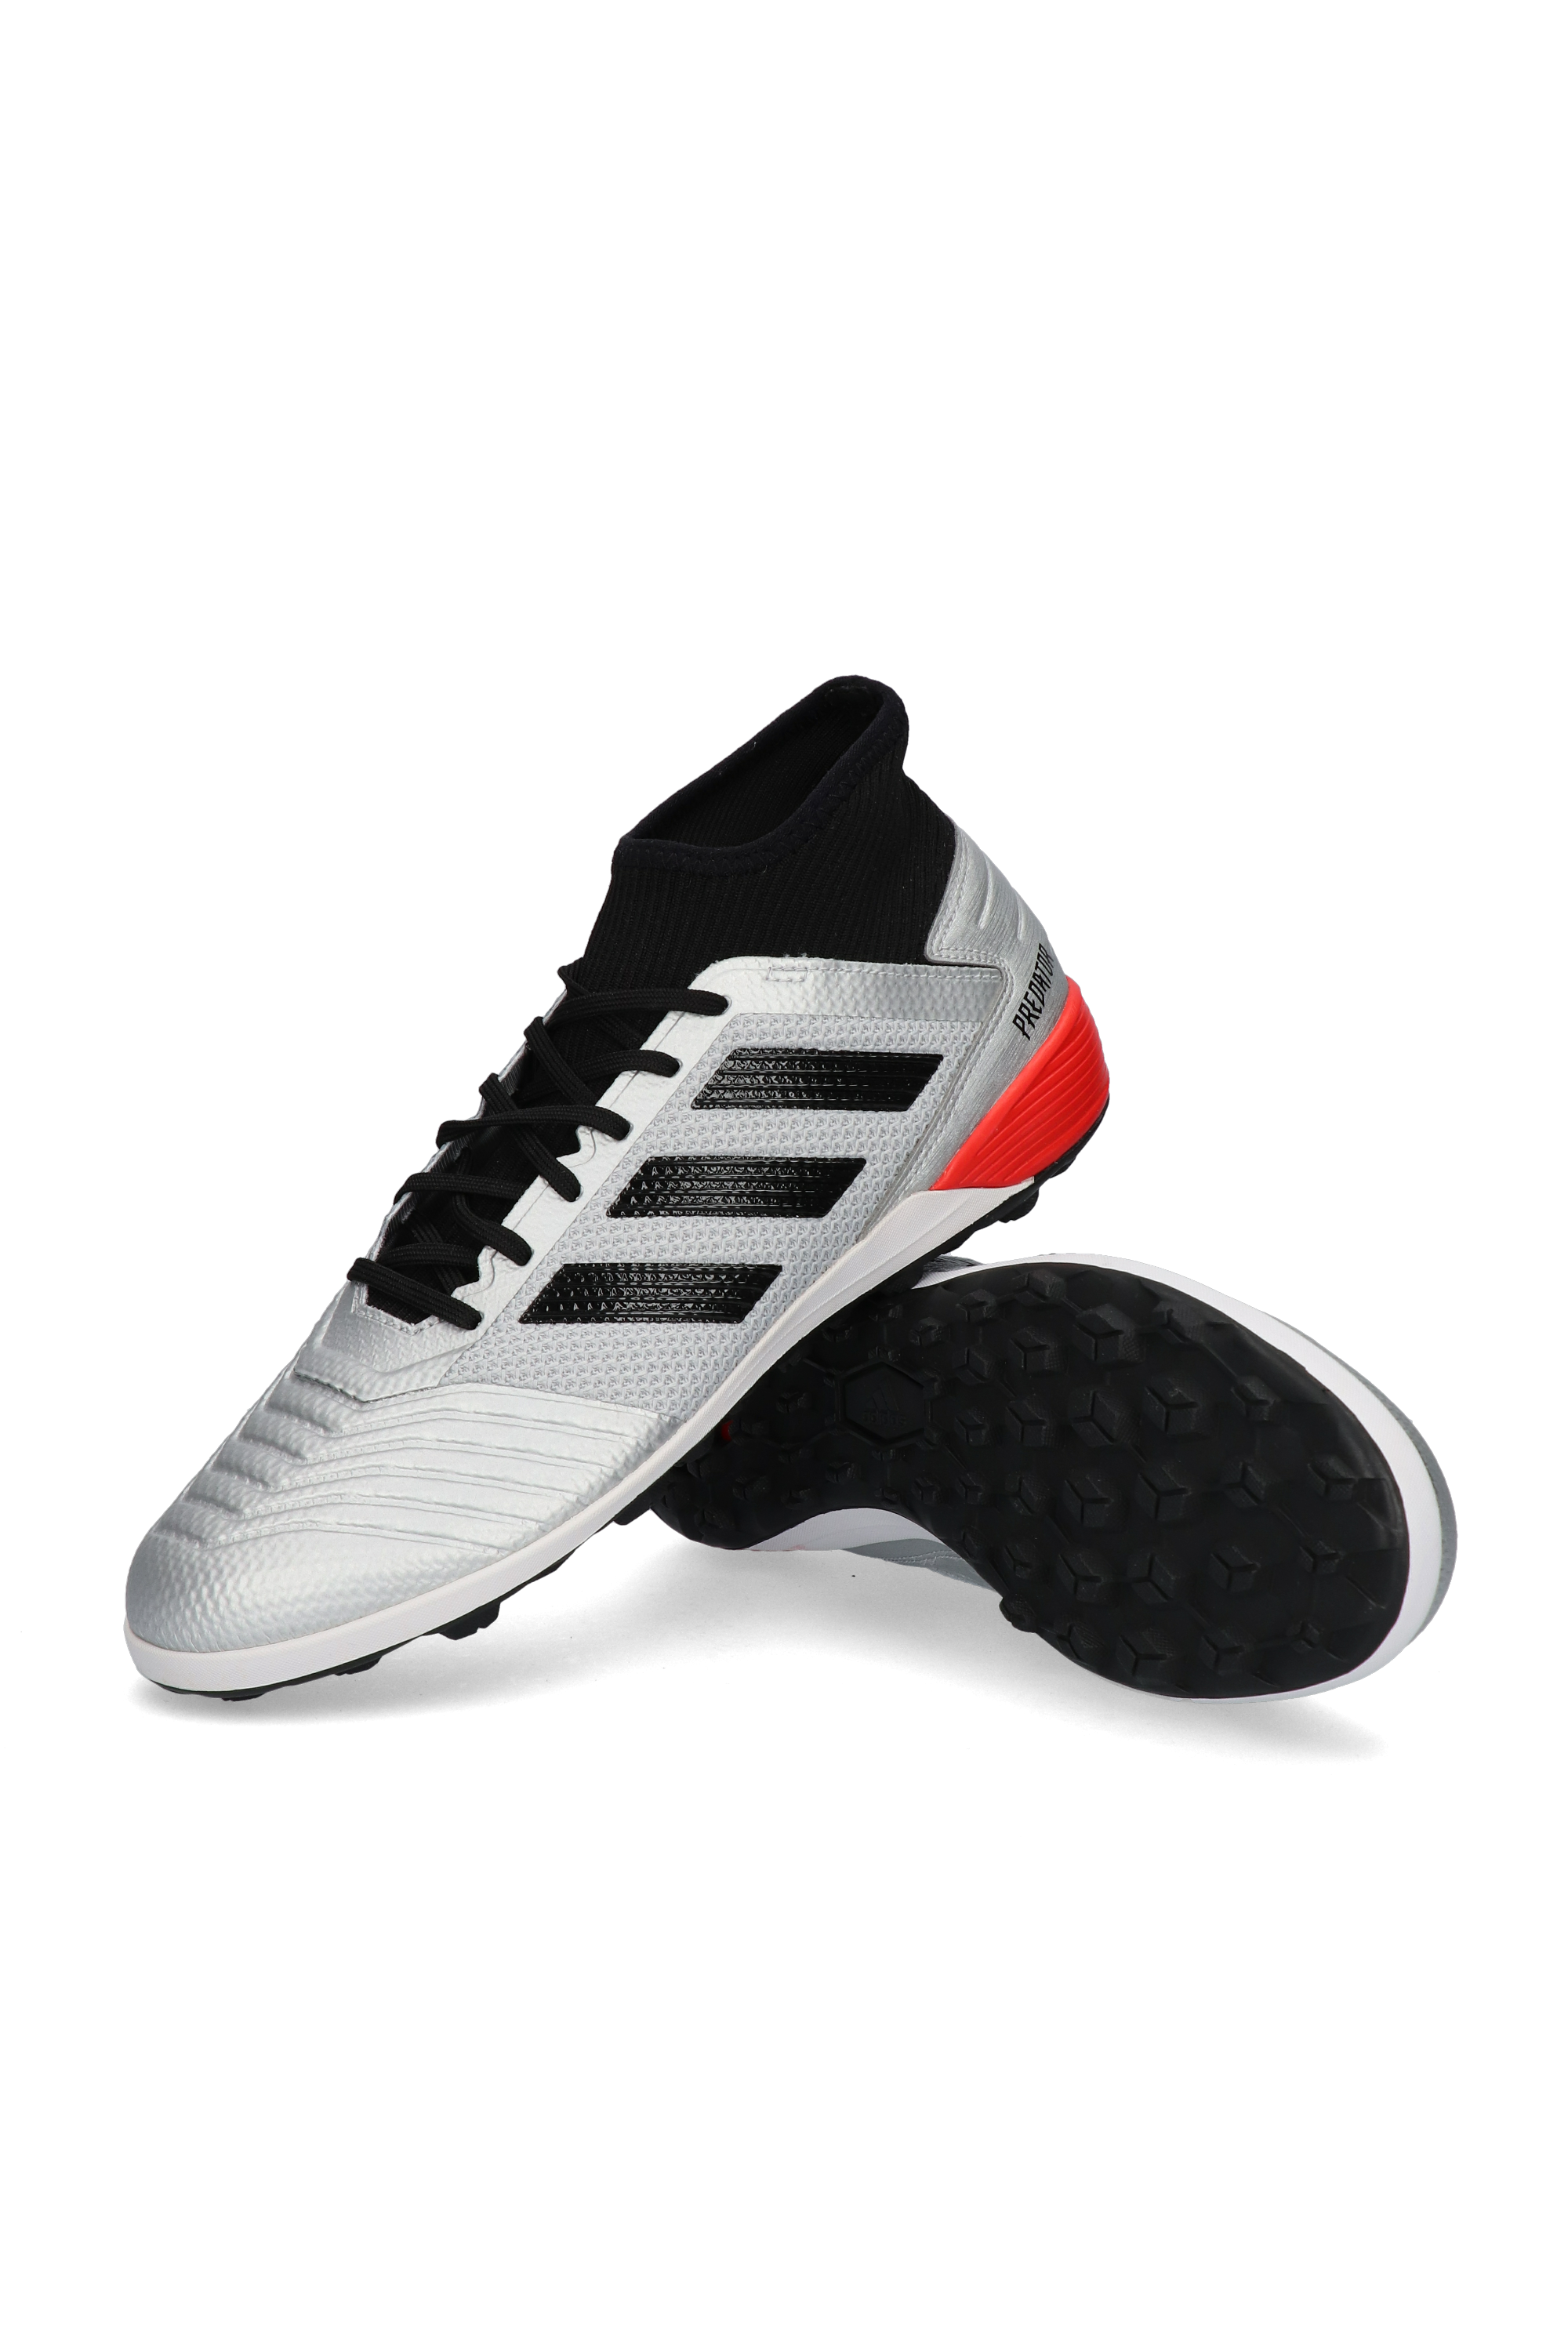 Technology Put up with Aspire Adidas Predator Tf 19.3 Factory Sale, SAVE 31% - aveclumiere.com